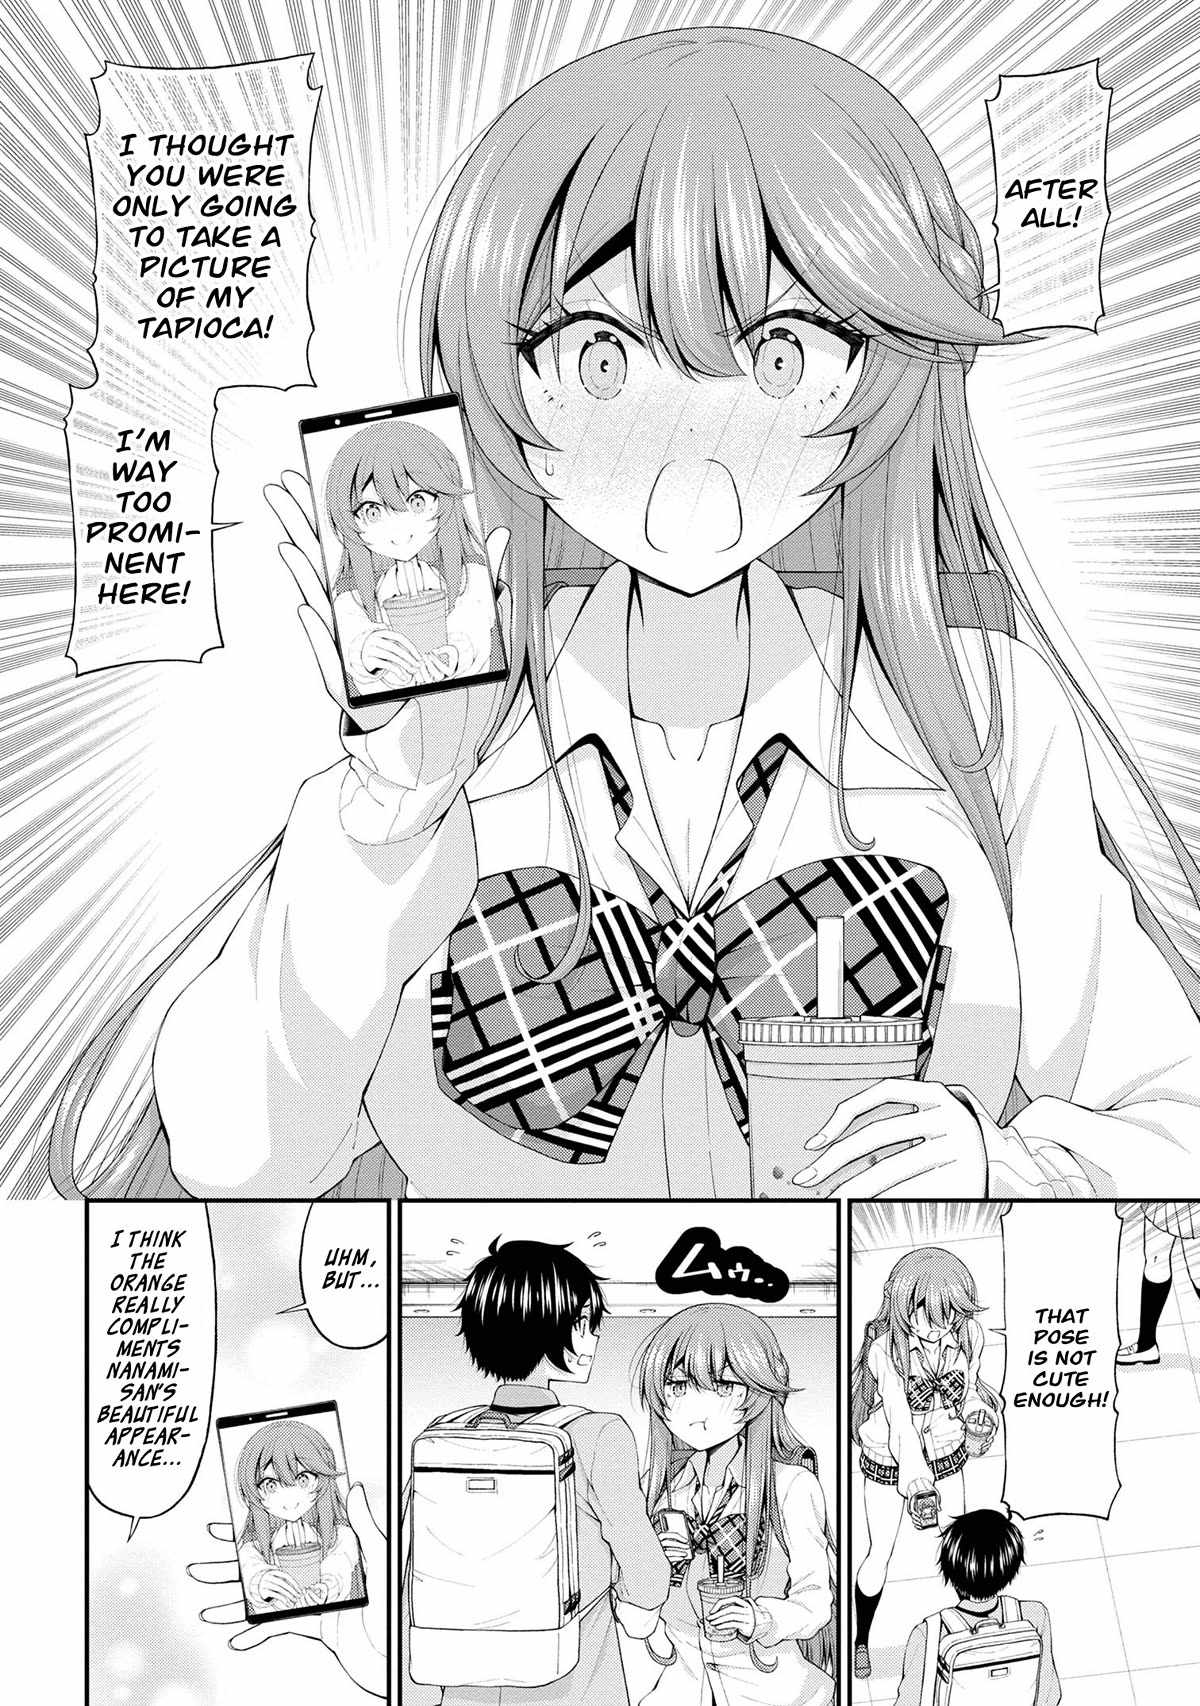 The Gal Who Was Meant to Confess to Me as a Game Punishment Has Apparently Fallen in Love with Me Chapter 14-eng-li - Page 5